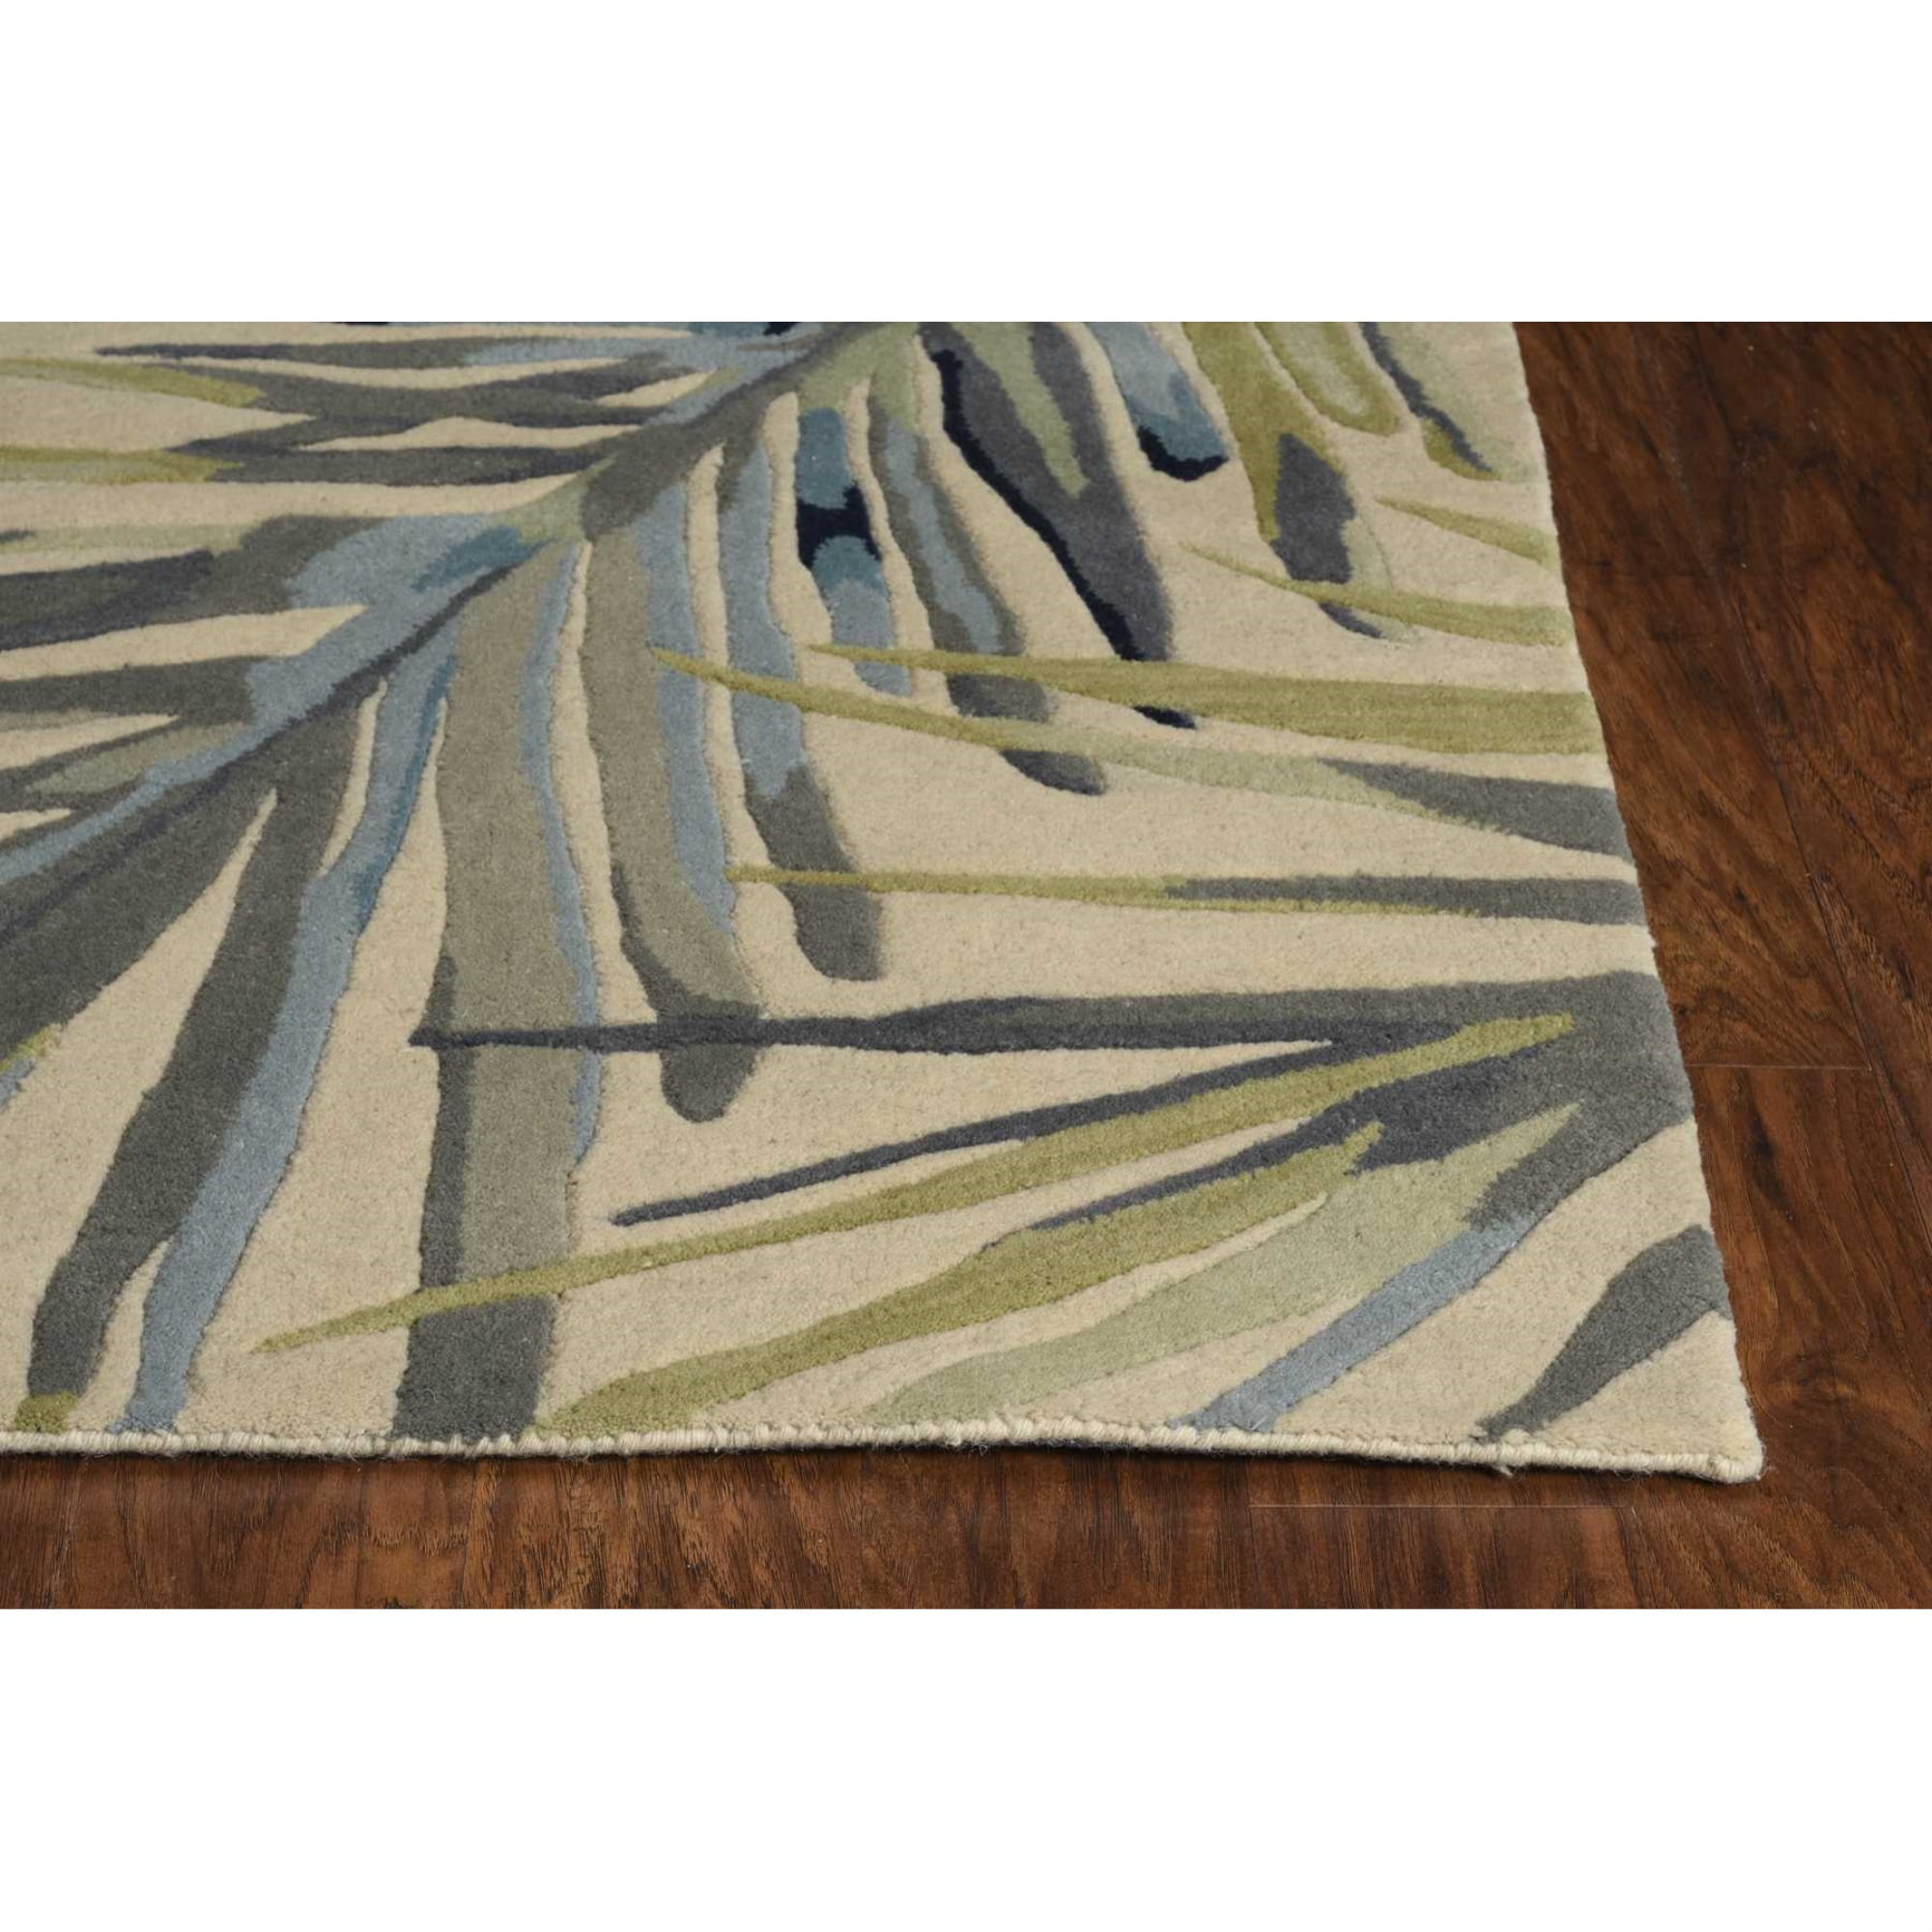 10 Ivory Blue Hand Tufted Tropical, Tropical Runner Rug